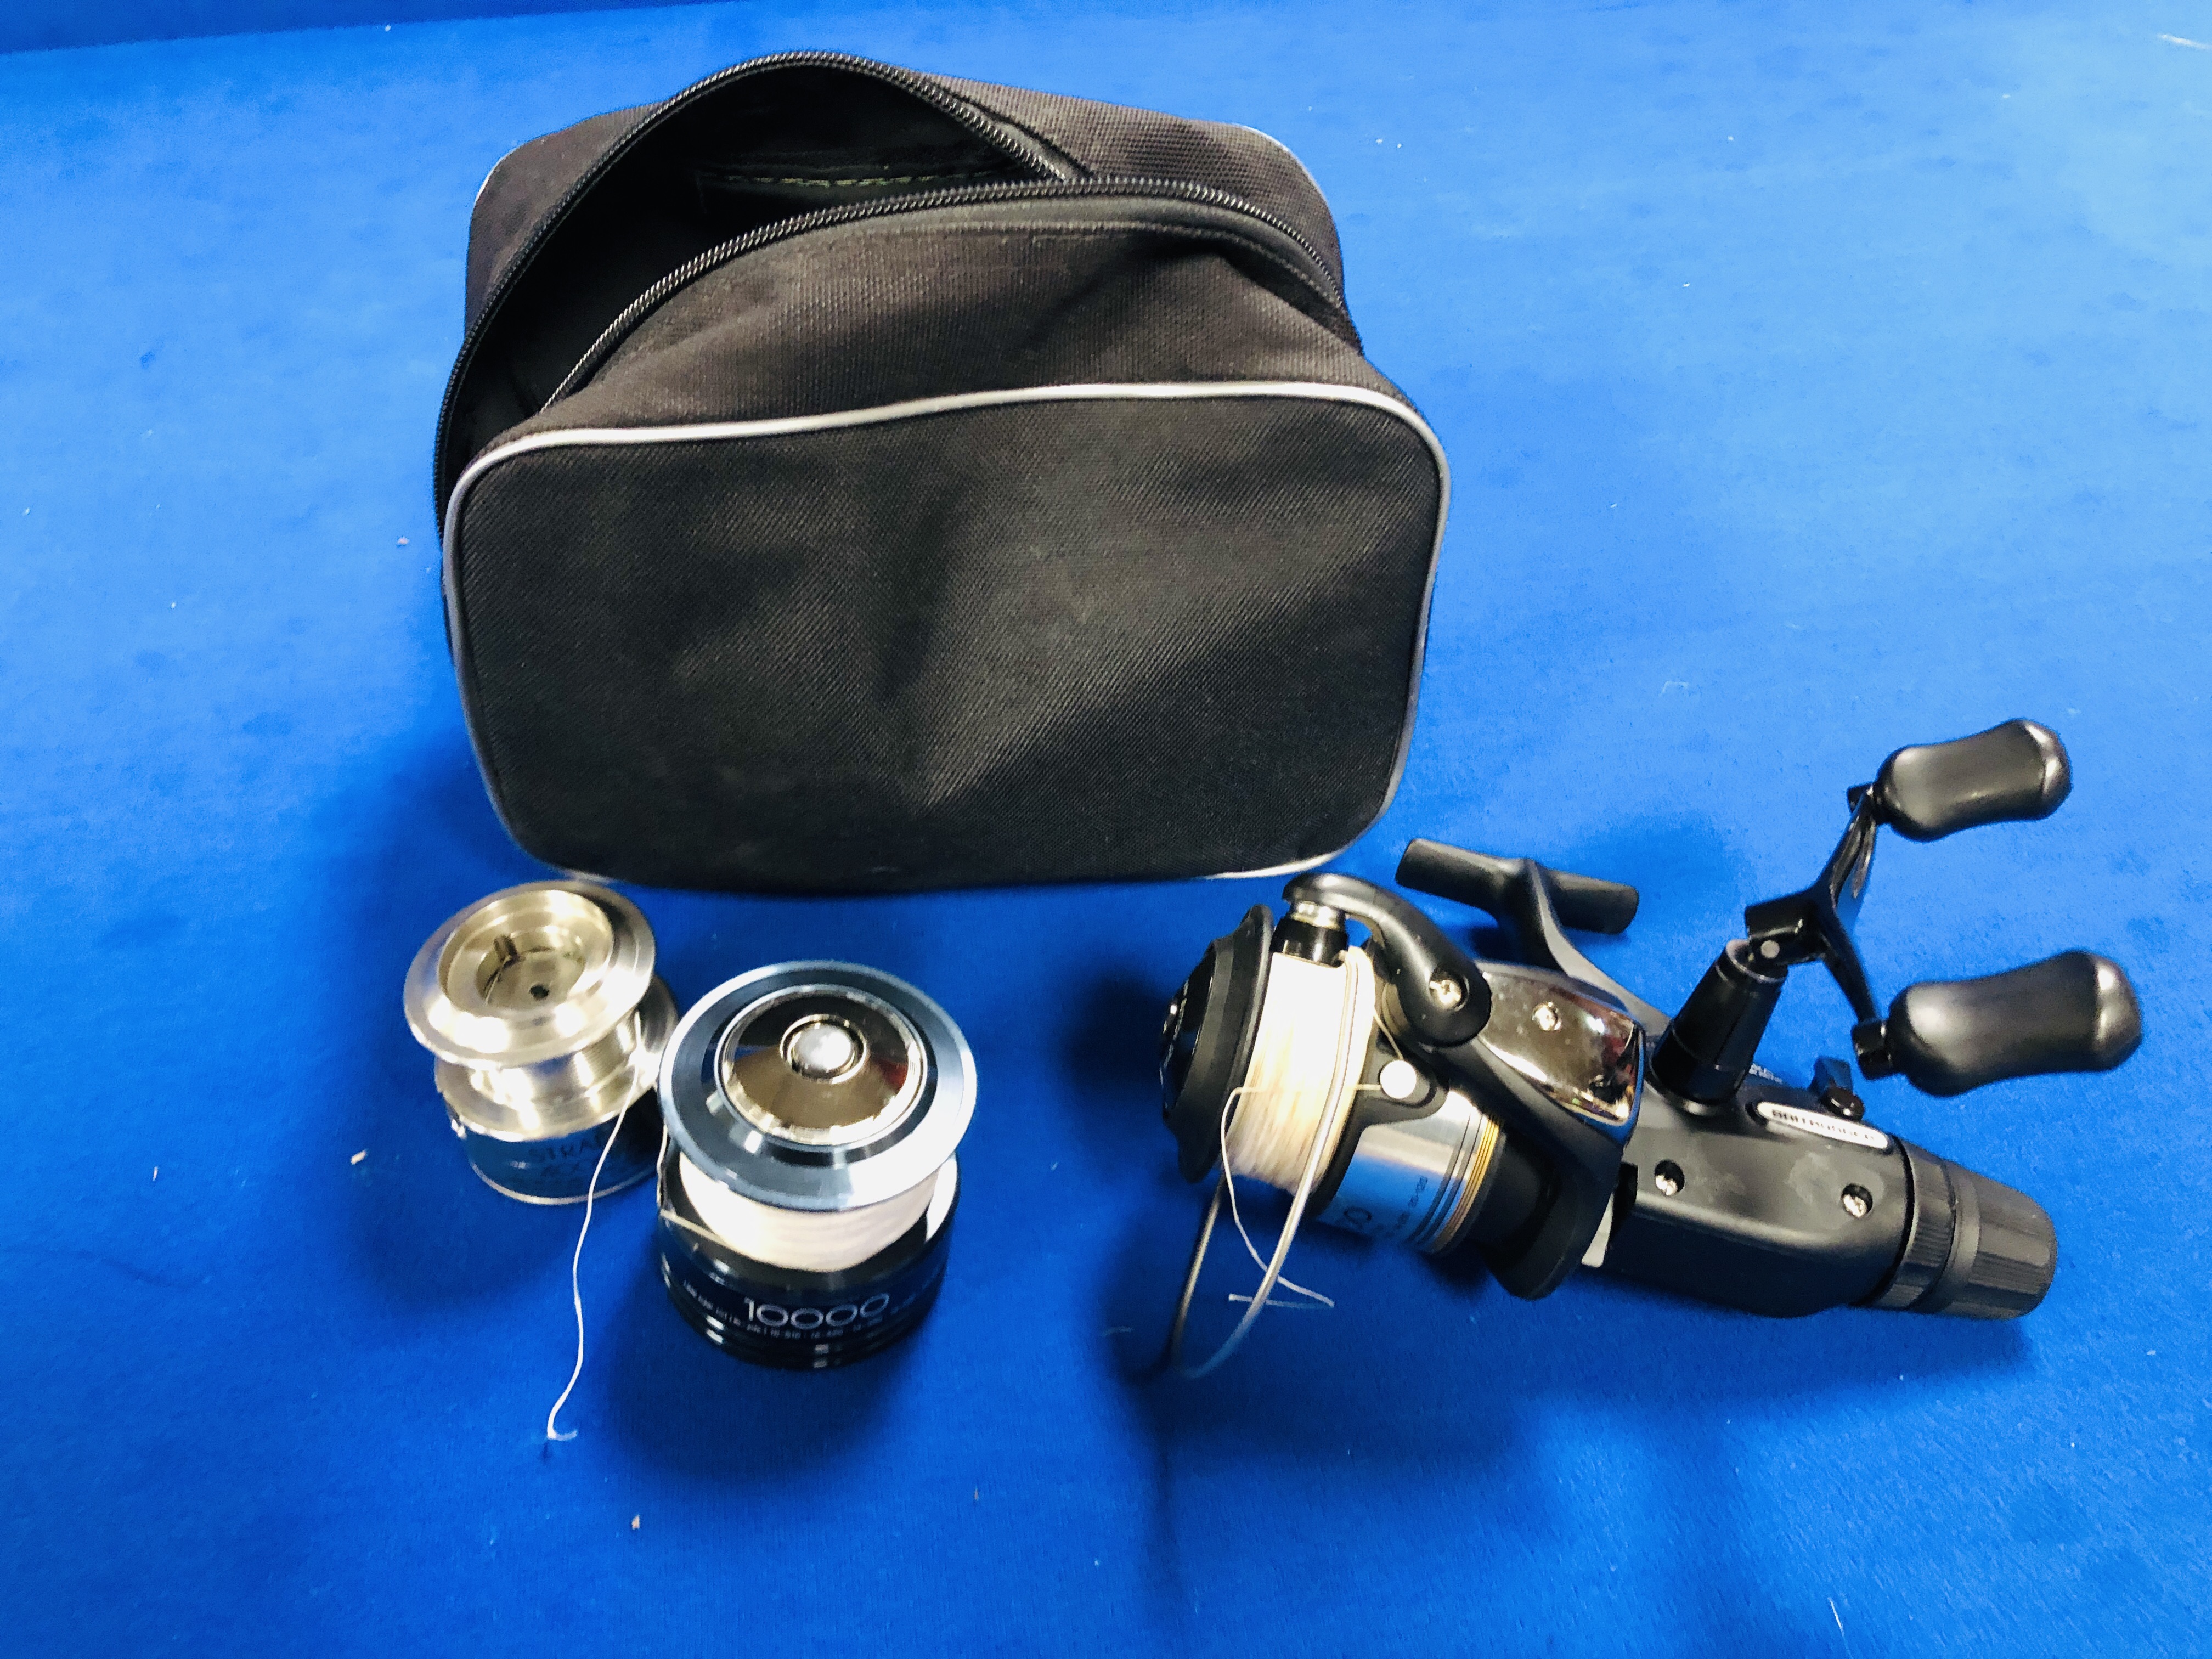 A BAIT RUNNER ST 6000 RA REEL WITH 2 SPARE SPOOLS AND BAG